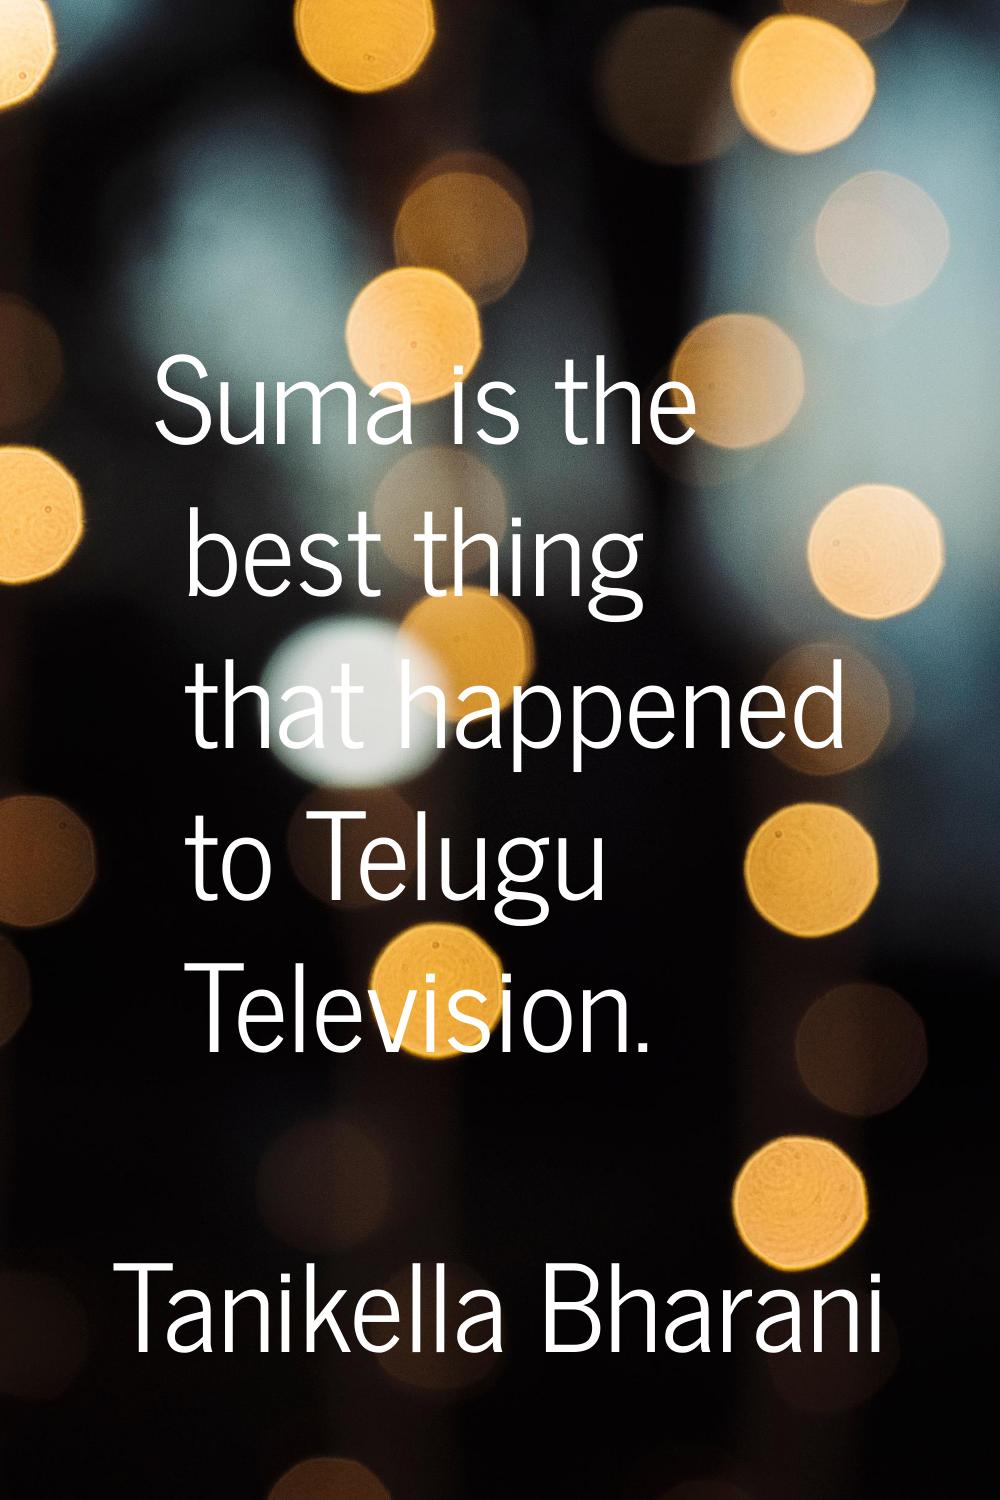 Suma is the best thing that happened to Telugu Television.